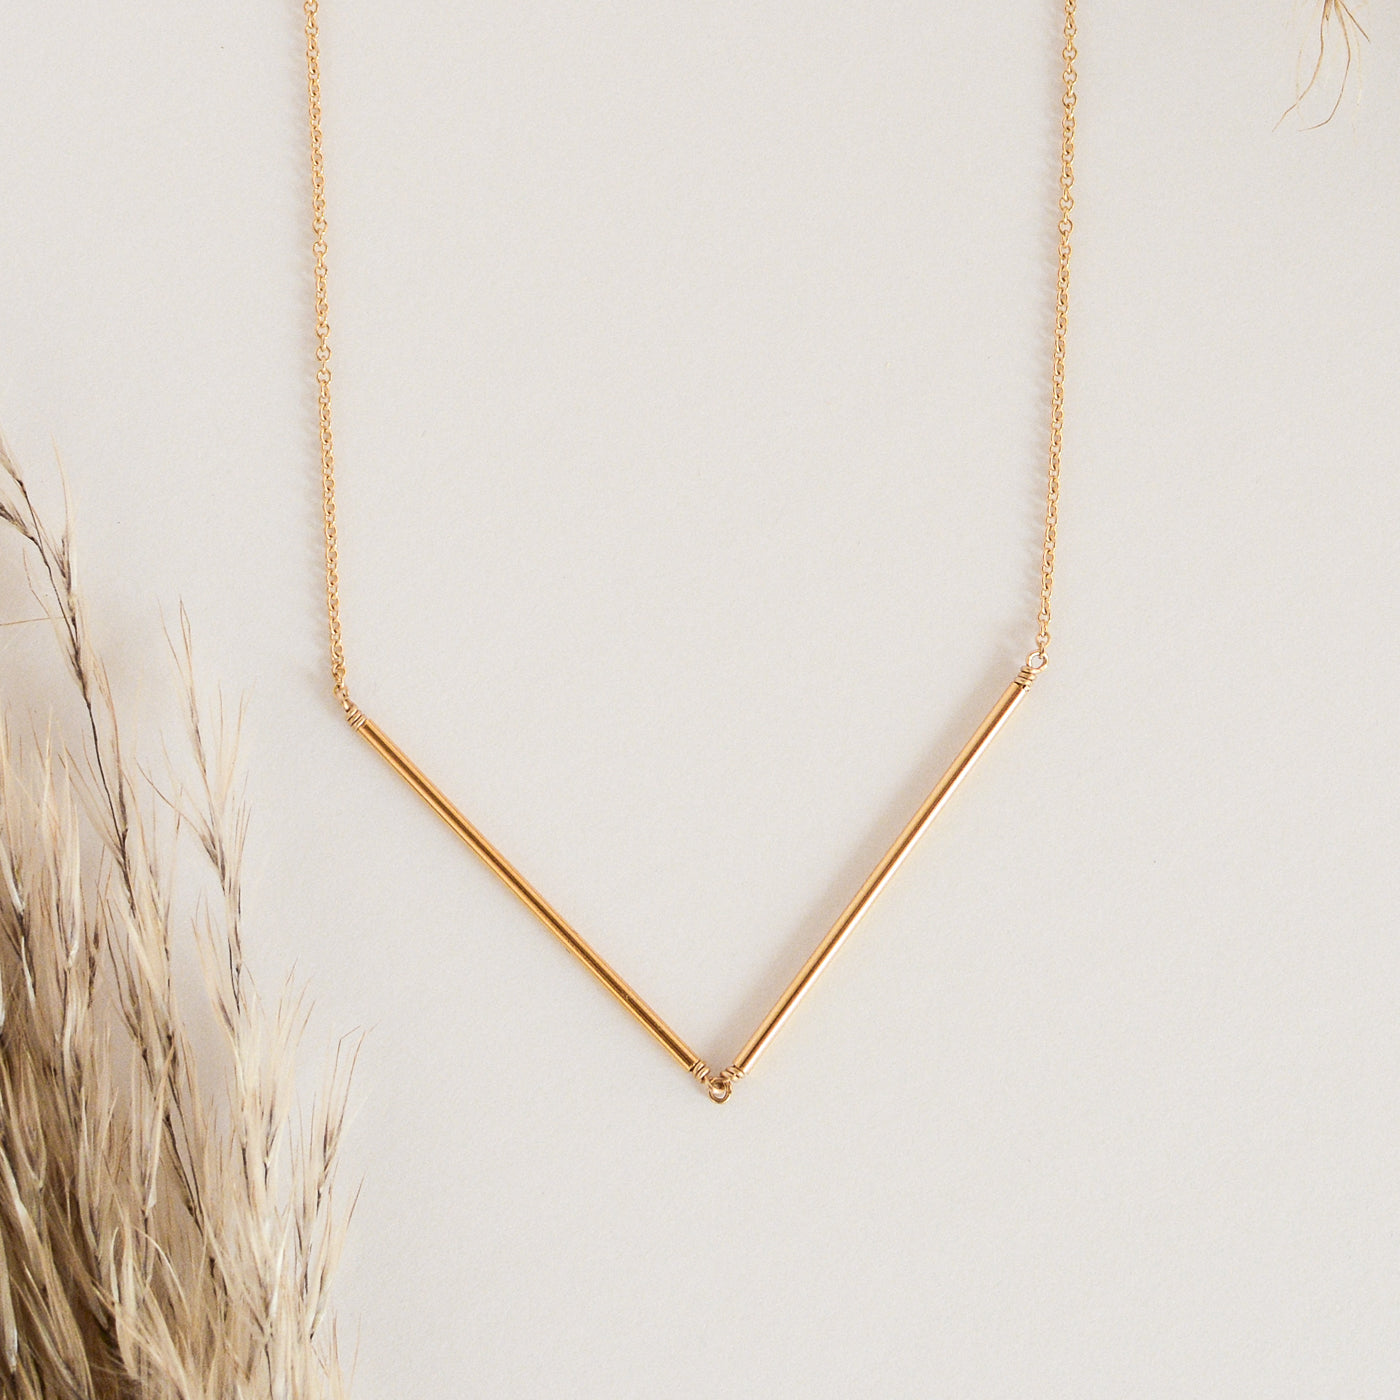 Golden Hinged Bar Necklace